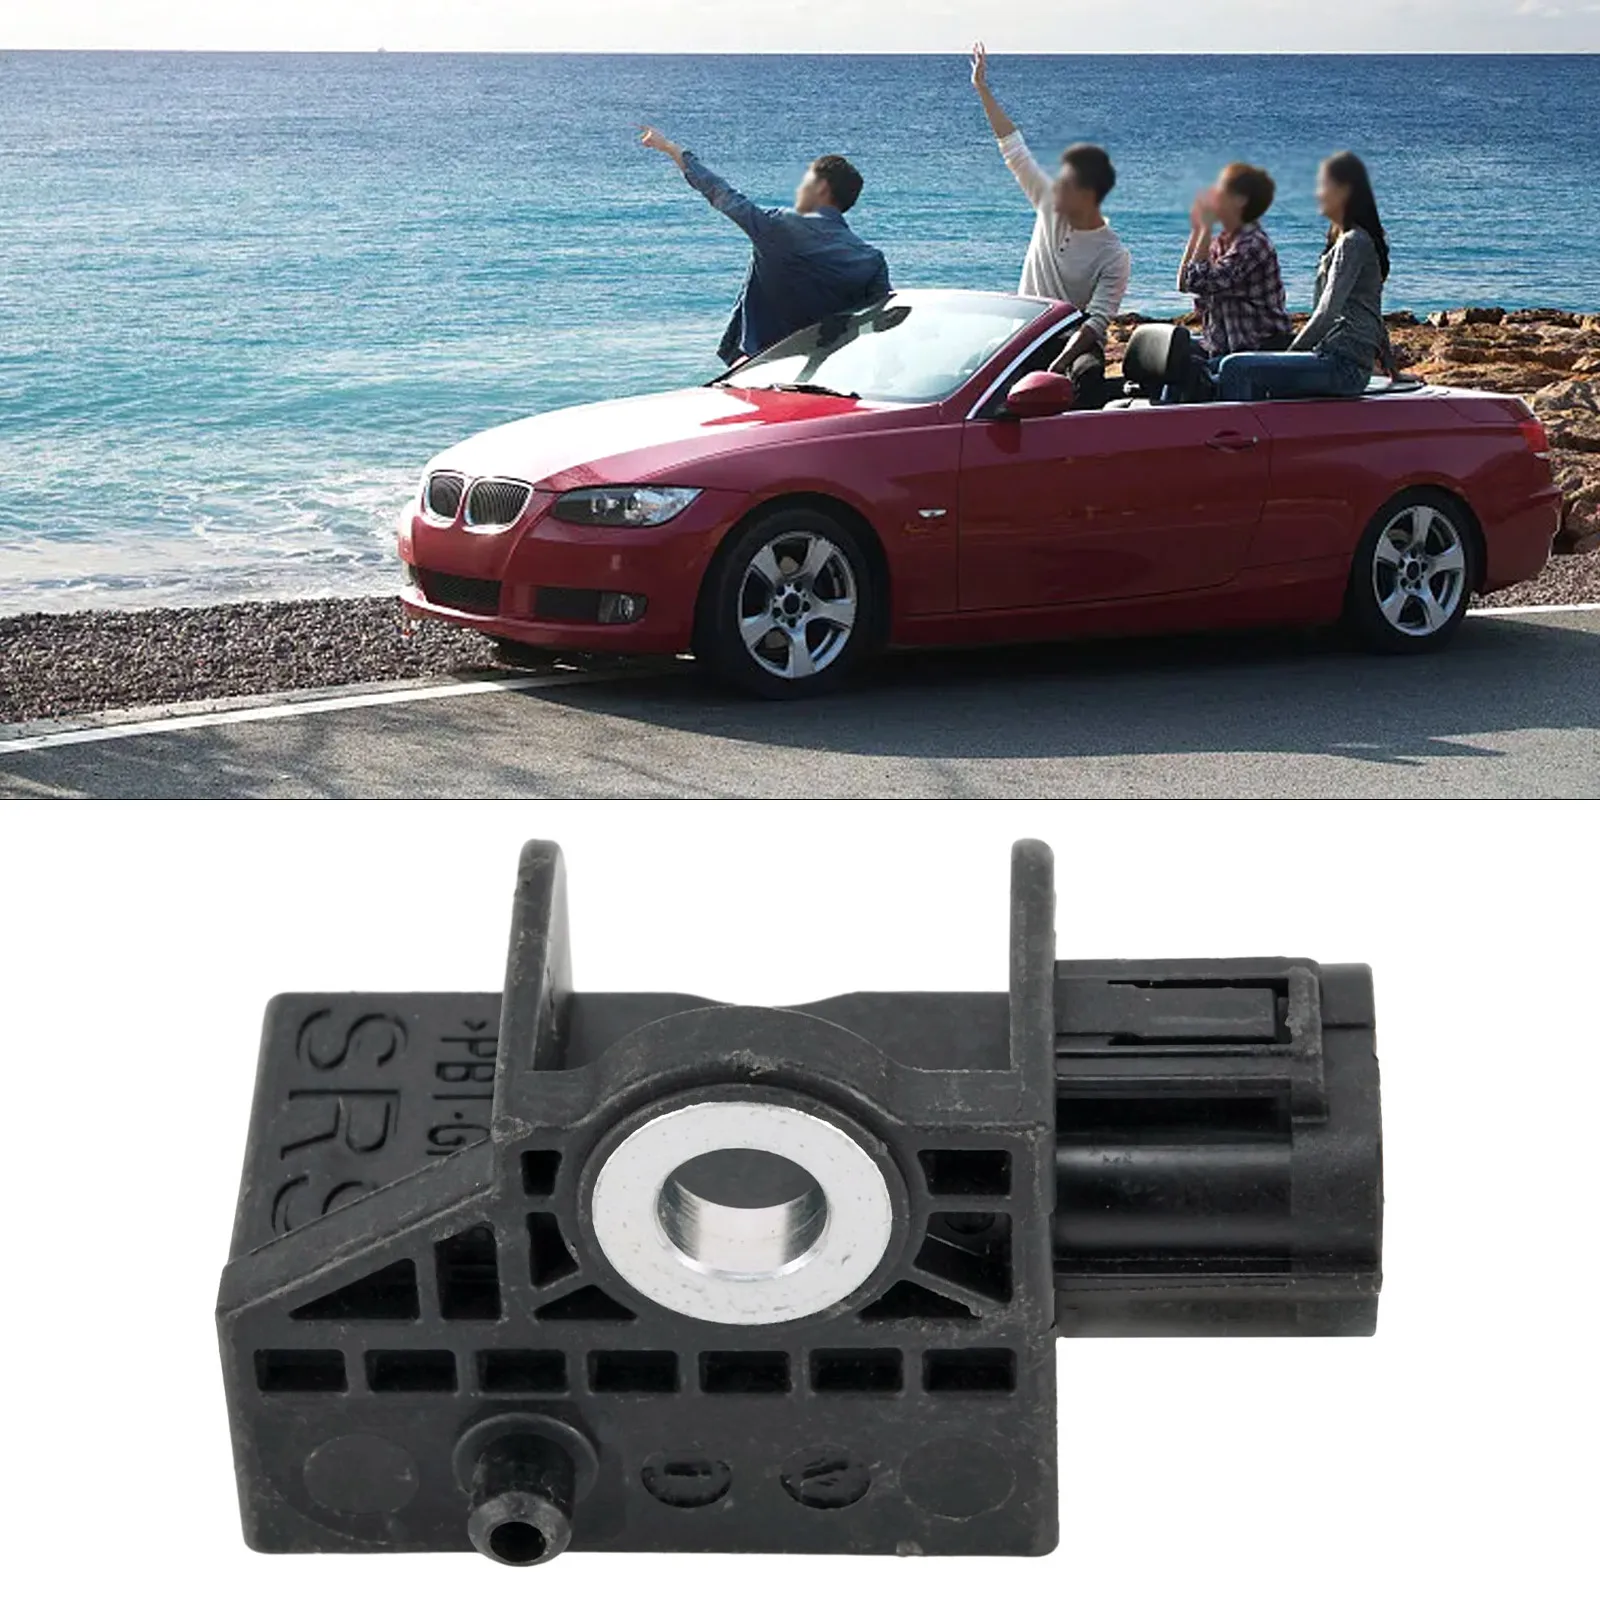 

1x Front Impact Sensor Fits For Honda For Crv Plastic 2007-2011 77930-SWA-A11 Correct Connector Direct Installation